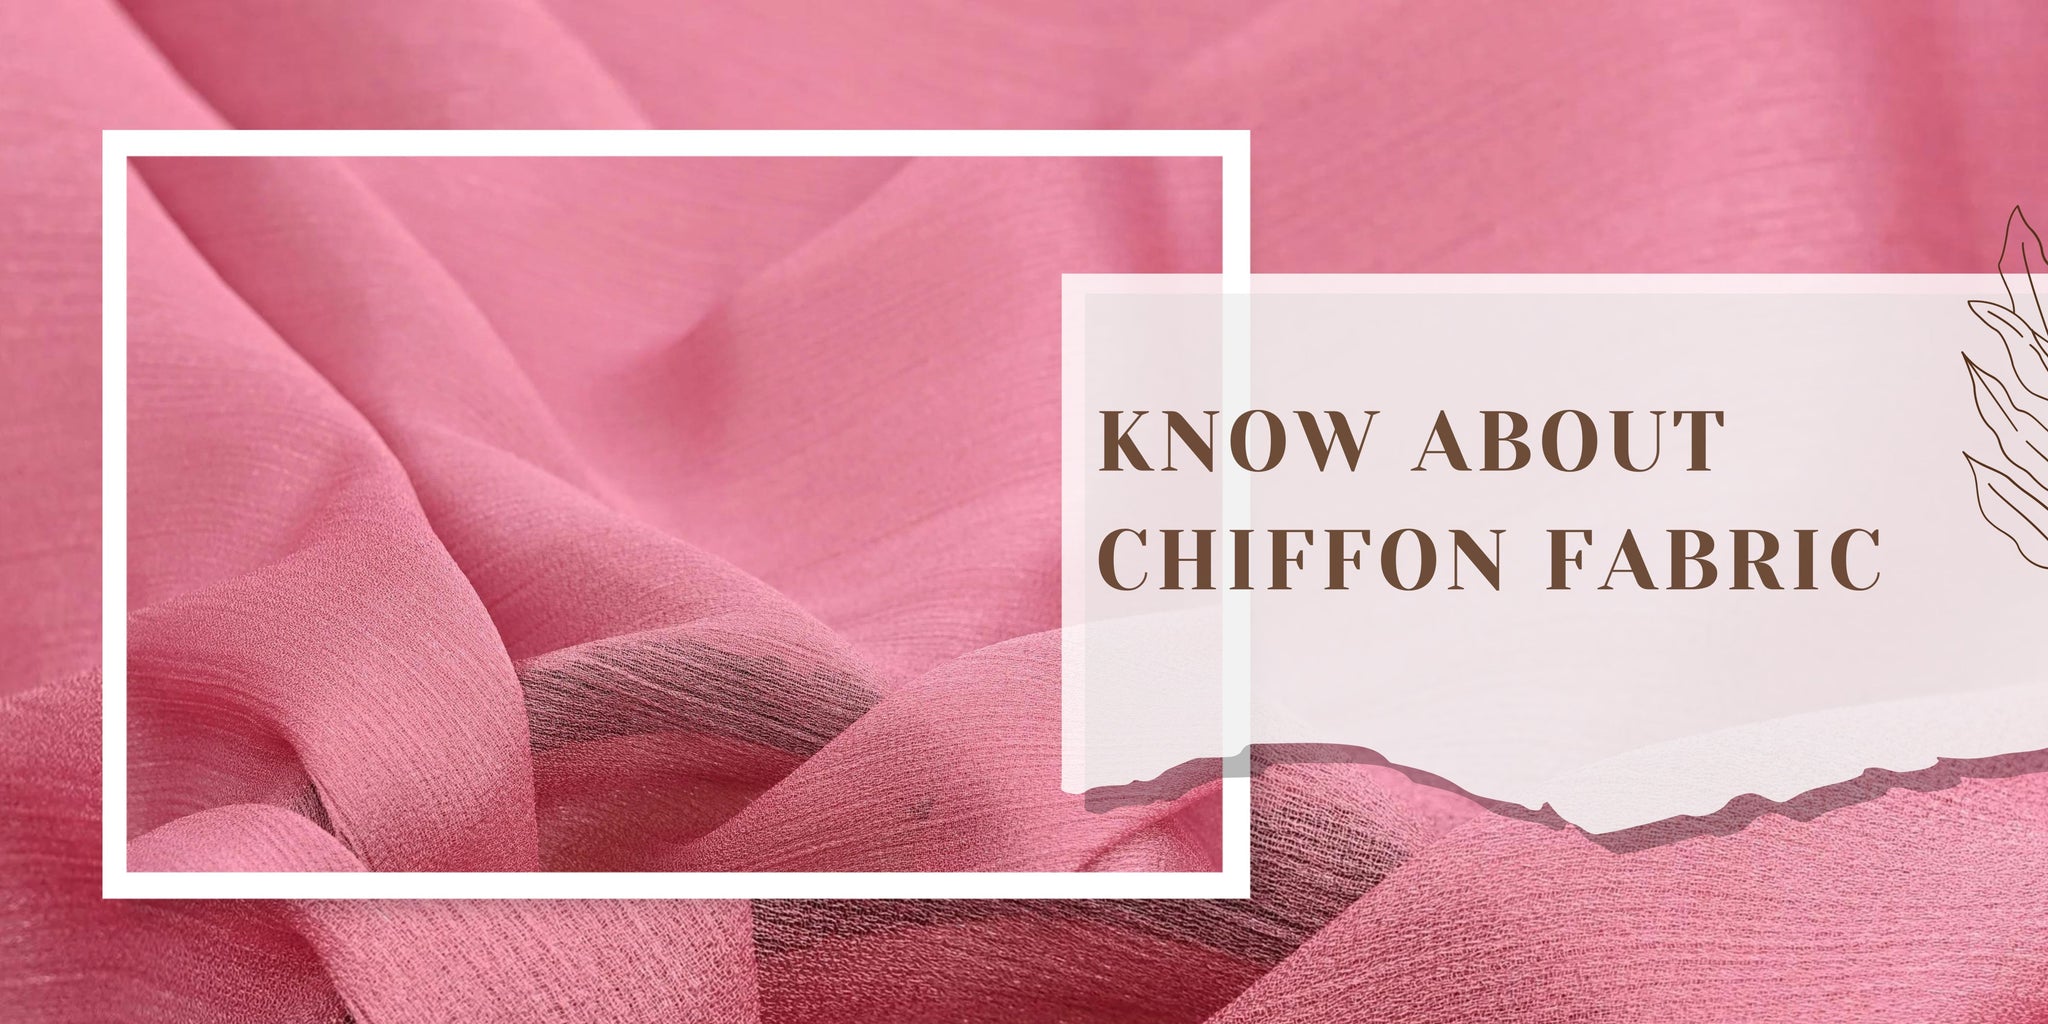 All You Need To Know About Chiffon Fabric!